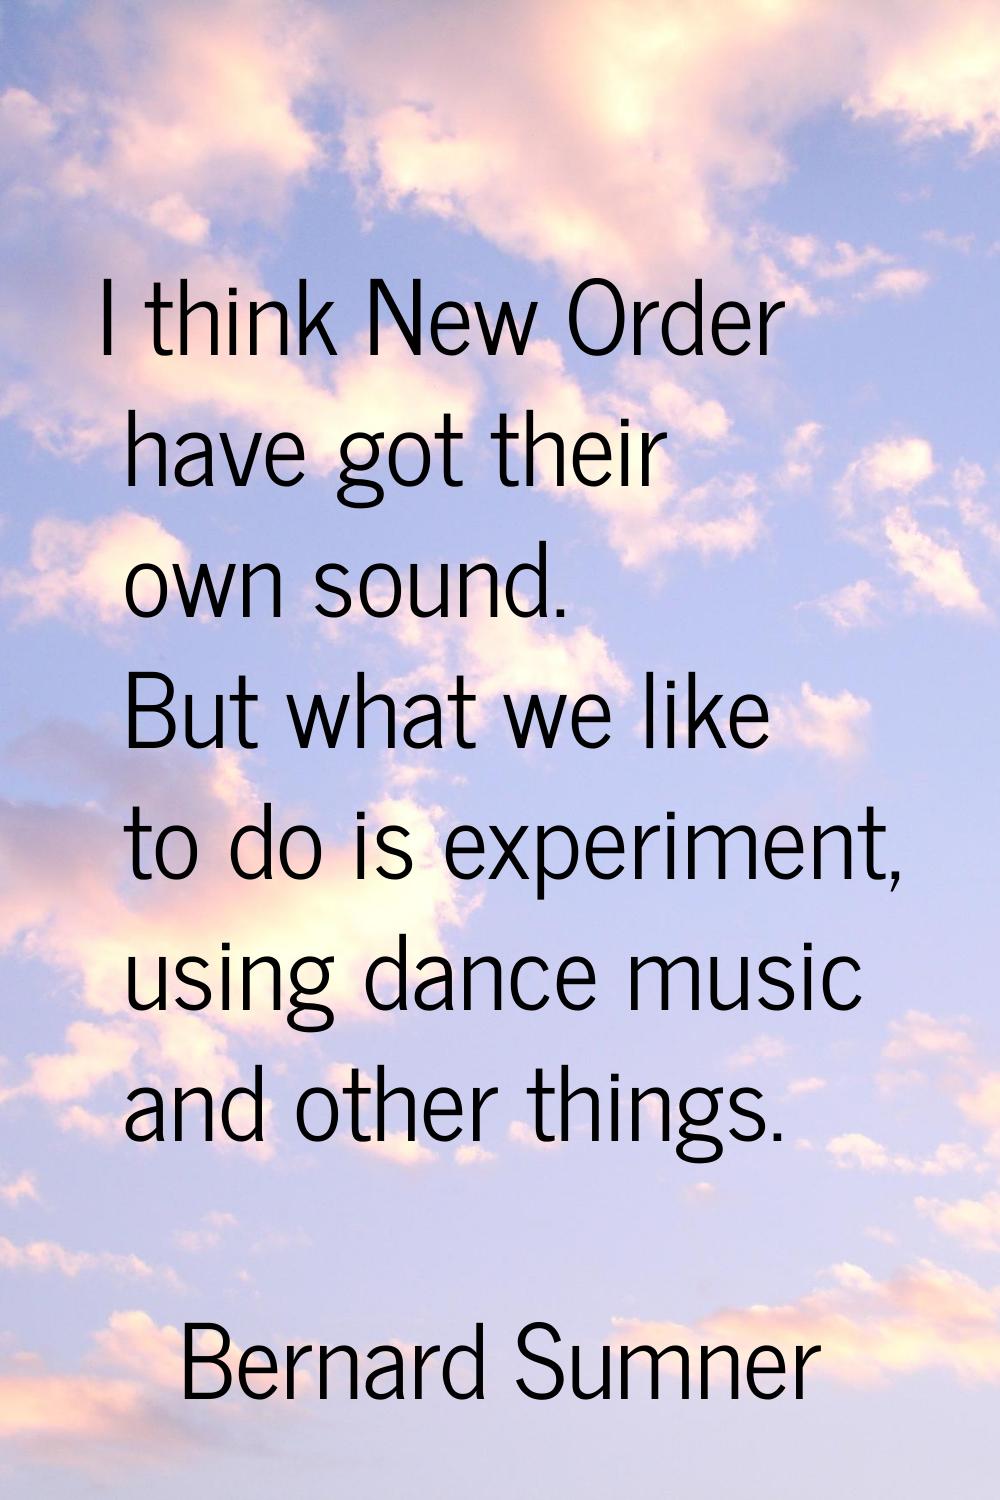 I think New Order have got their own sound. But what we like to do is experiment, using dance music